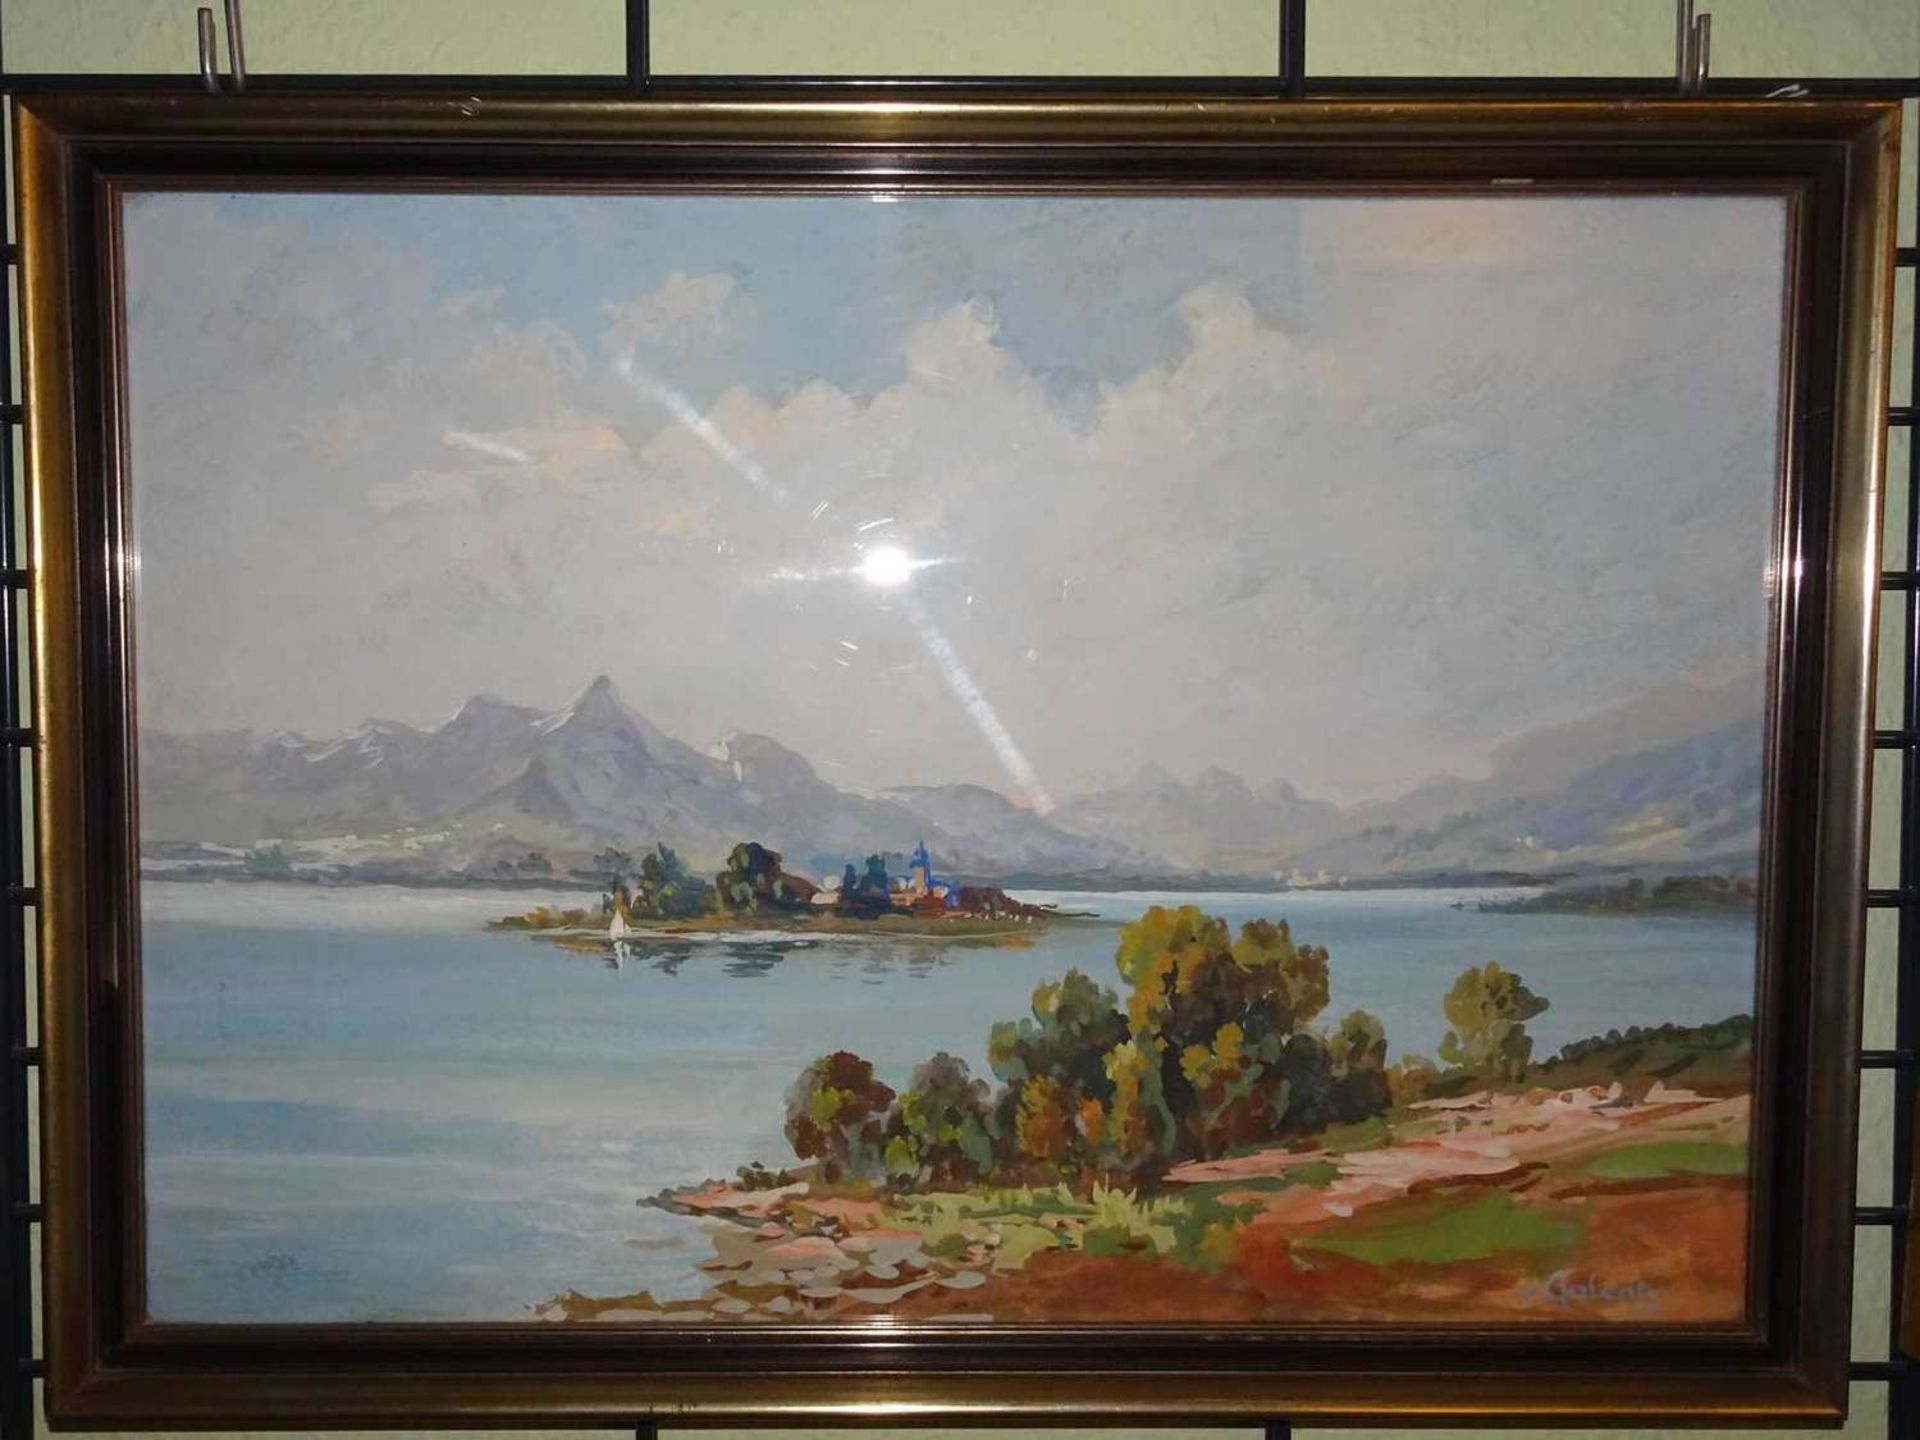 Gerd v. Galentz, watercolor on paper, "Fraueninsel Chiemsee", signed lower right. Framed behind - Image 2 of 2